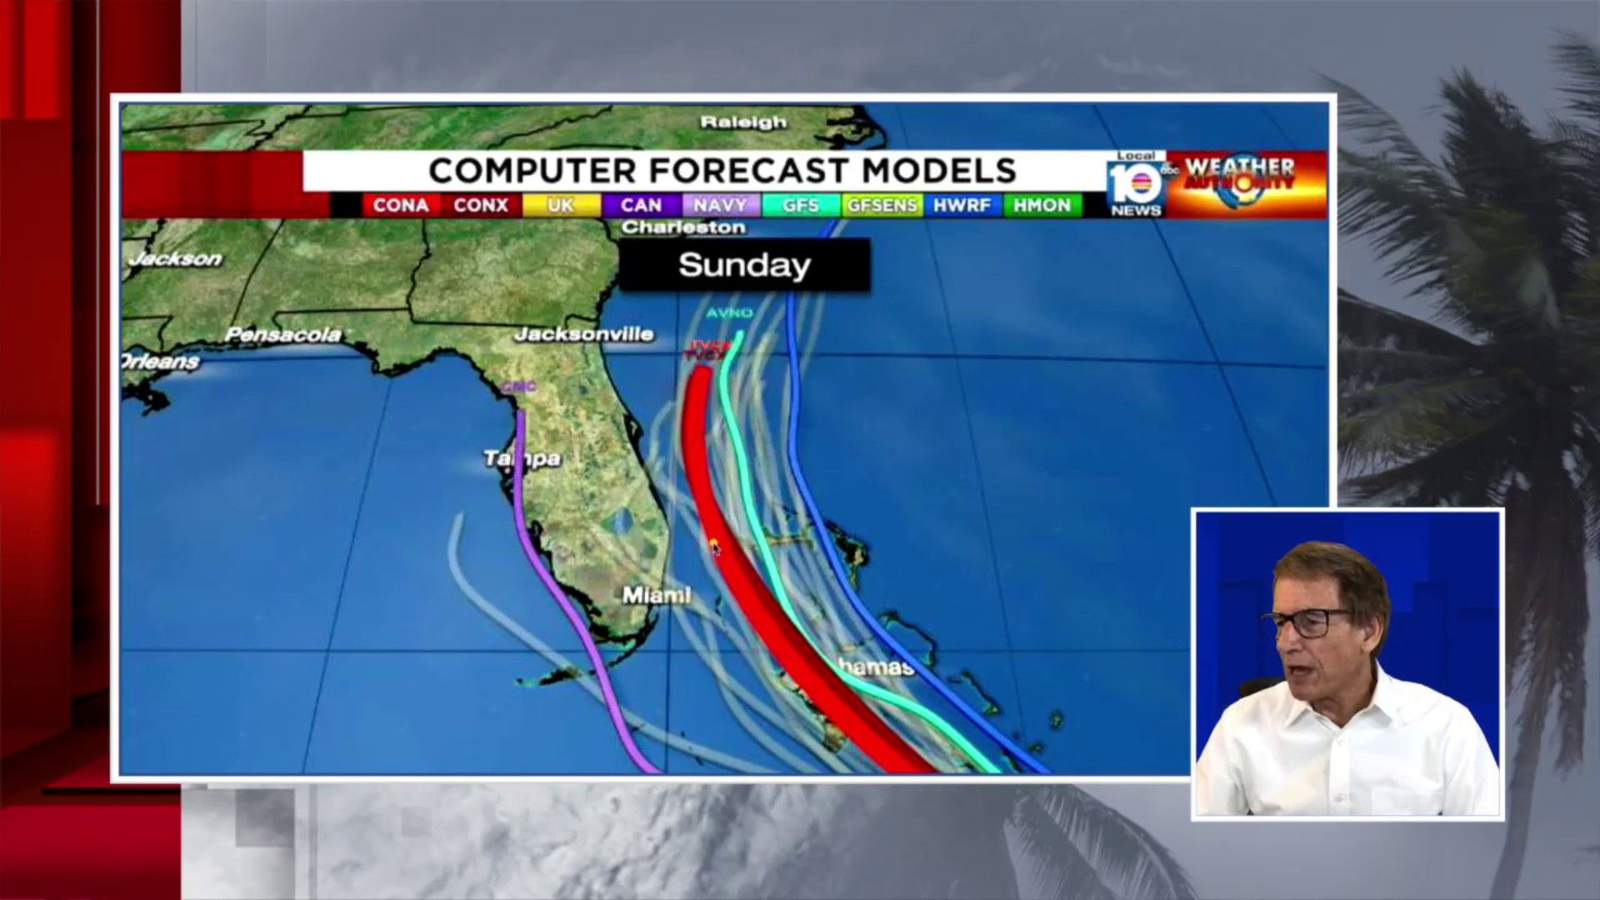 Norcross: Tropical Storm Isaias now forecast to become a hurricane